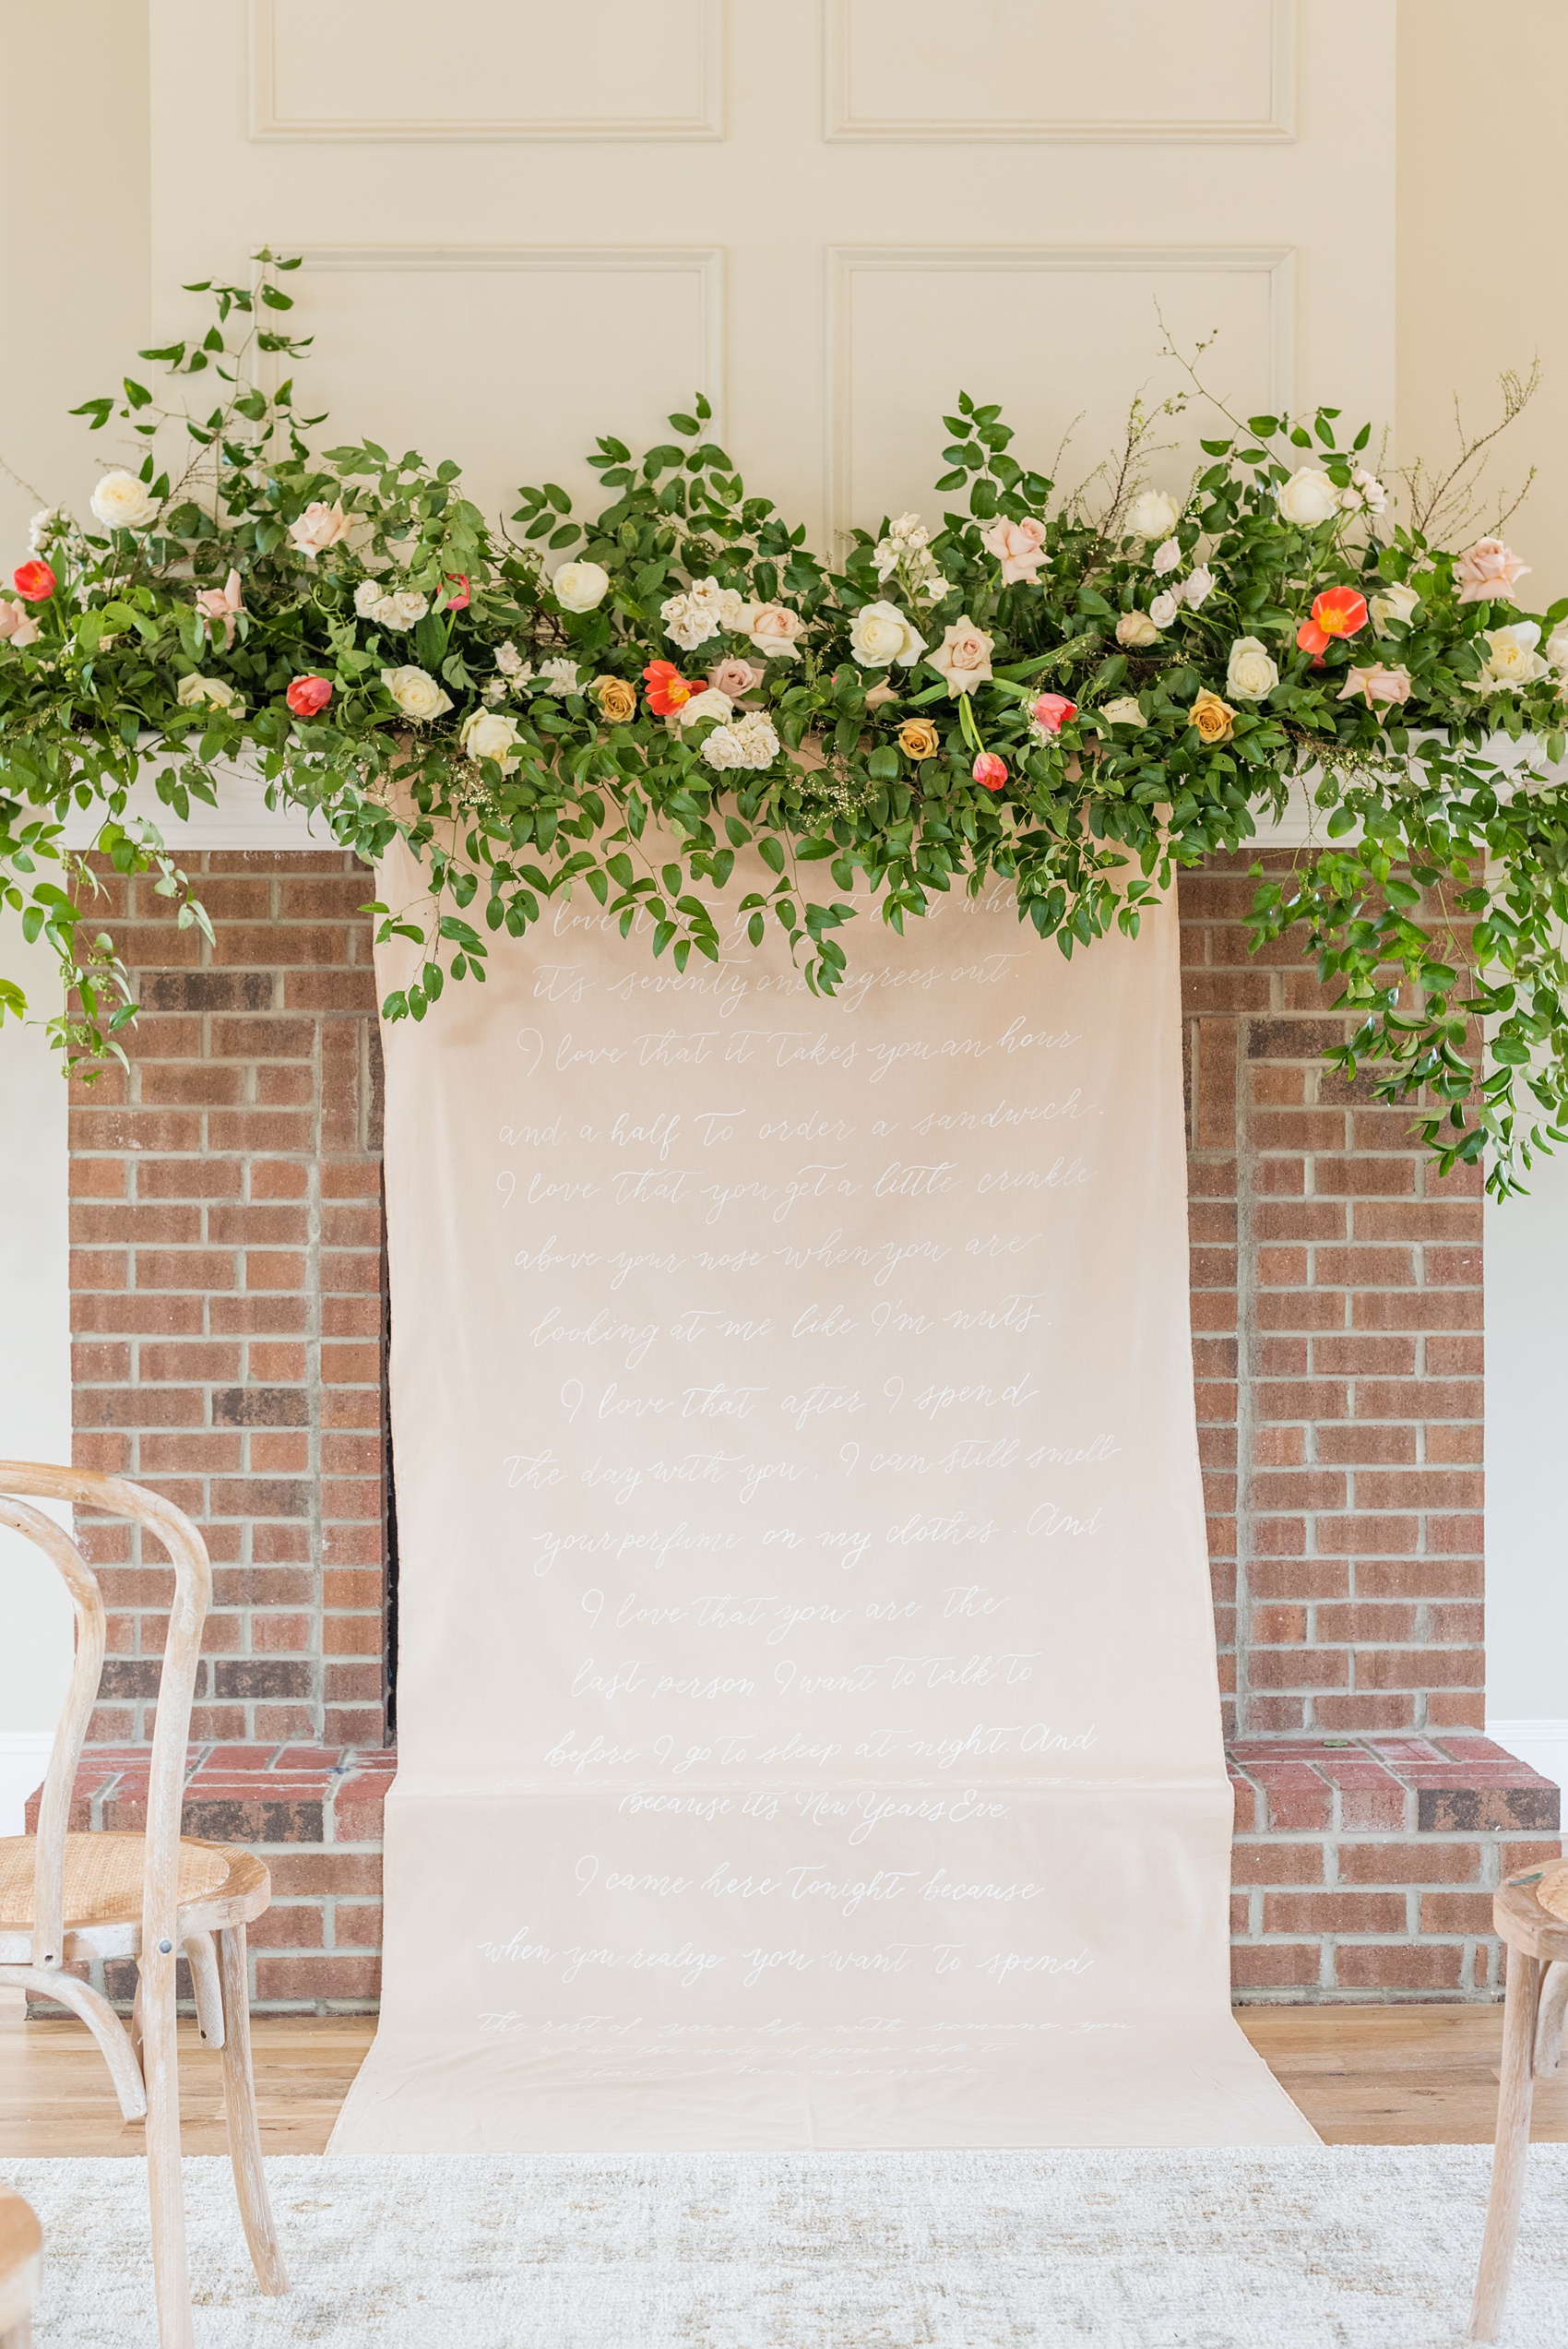 The Bradford NC Photos captured by Mikkel Paige Photography. This North Carolina Raleigh event venue has beautiful gardens and is perfect for outdoor or indoor ceremonies and receptions. Design by @vivalevent with a green, black and peach palette. Ceremony backdrop by Mason Dixon Designs and flowers by New Creations Flowers. #mikkelpaige #ceremonybackdrop #Raleighweddingphotographer #raleighweddingvenues